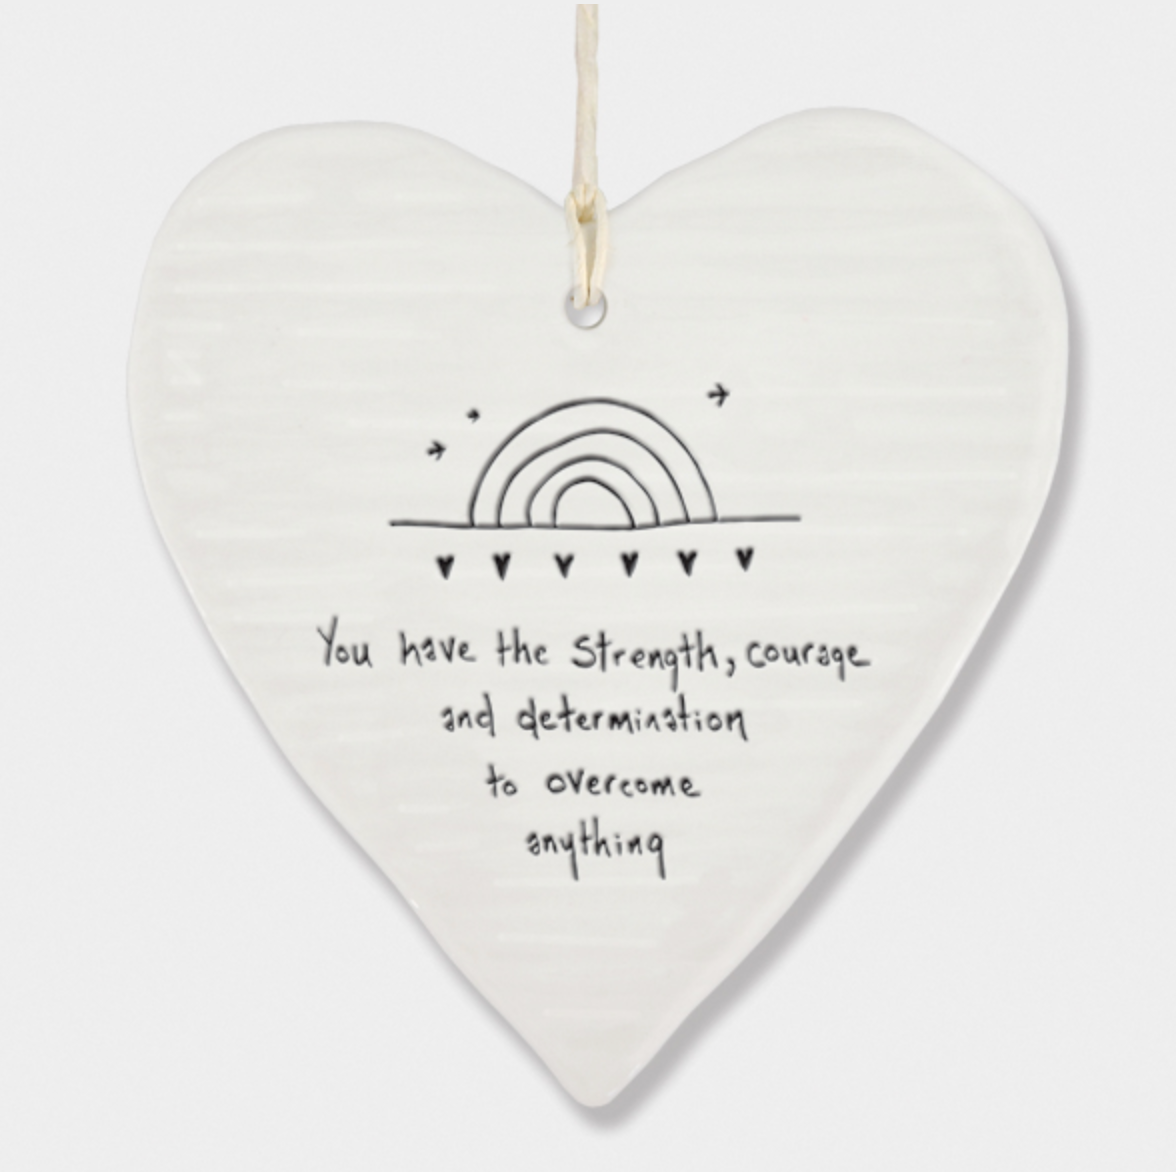 East of India Porcelain Hanging Heart - You have the strength, courage....